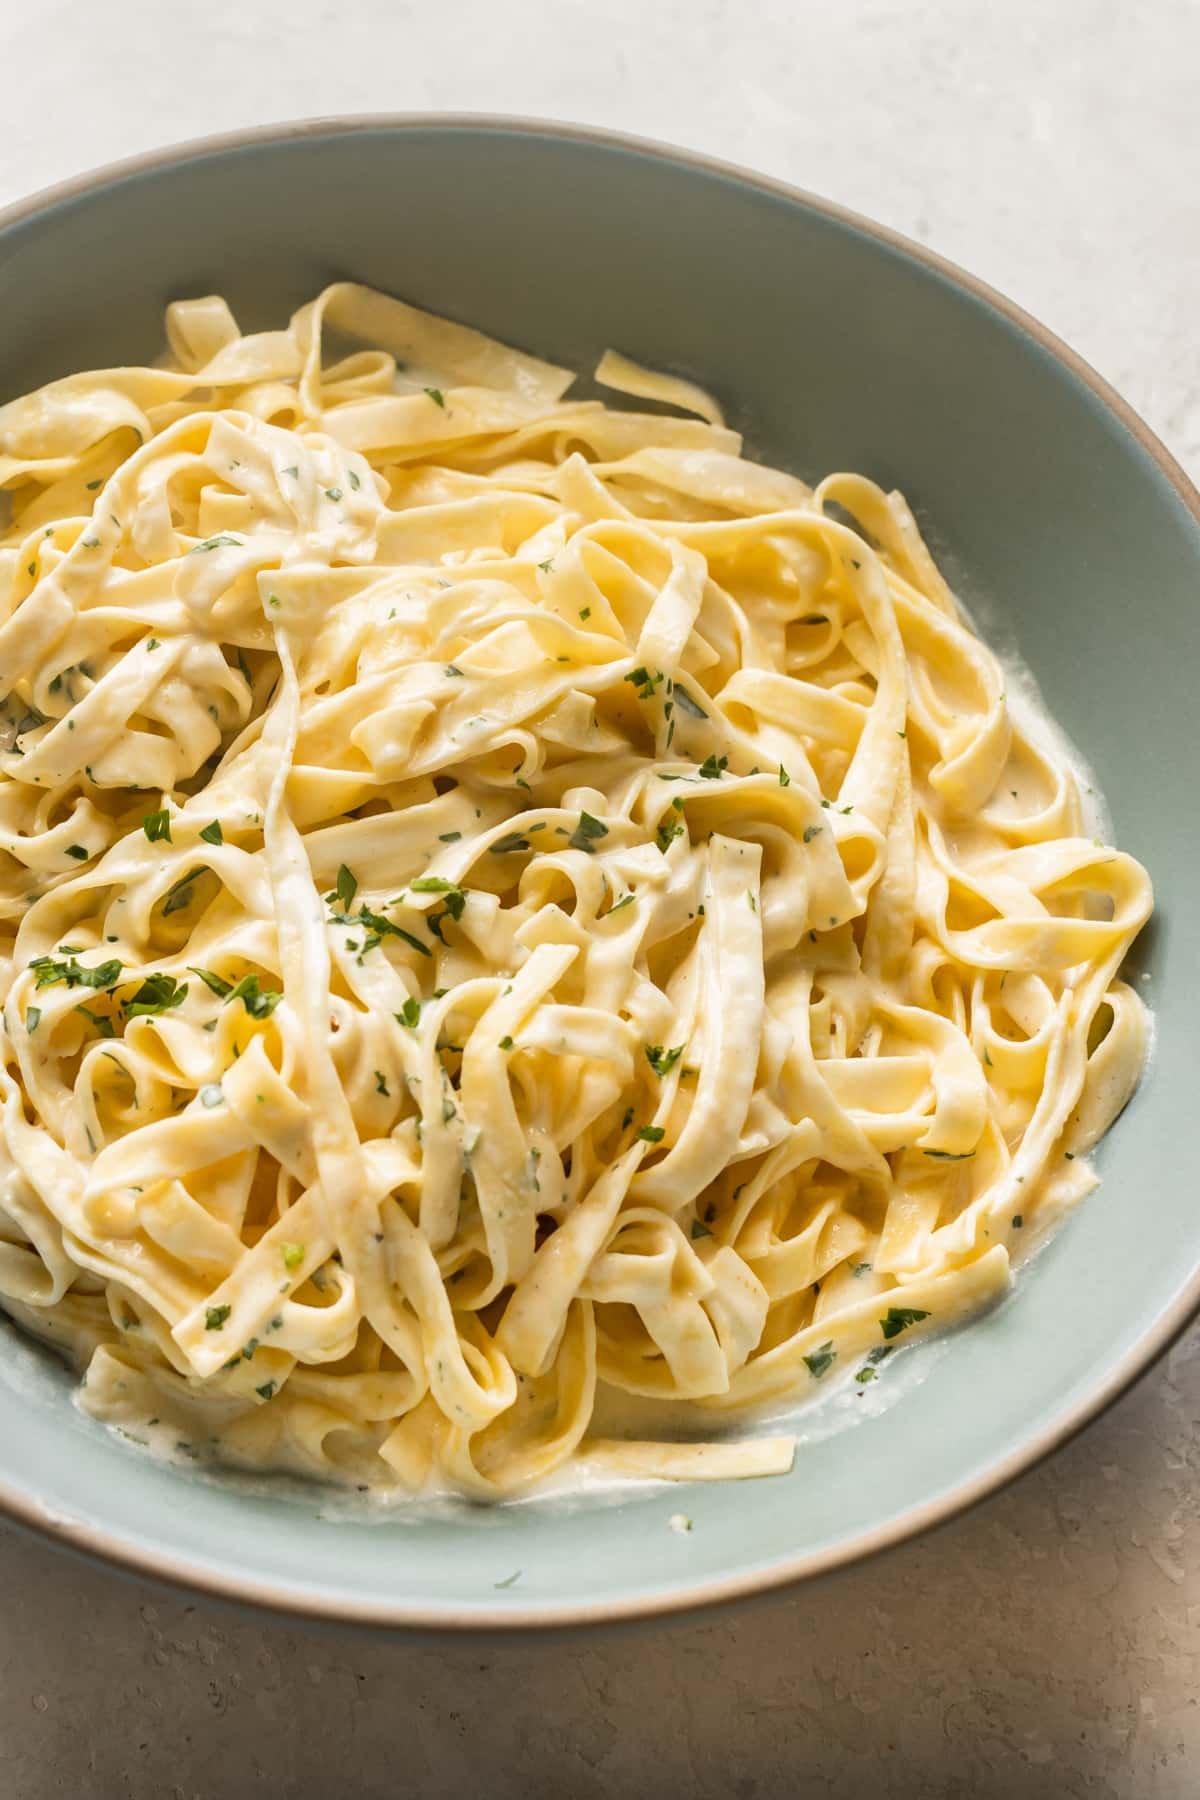 fettuccine pasta tossed with Alfredo sauce in a blue bowl.